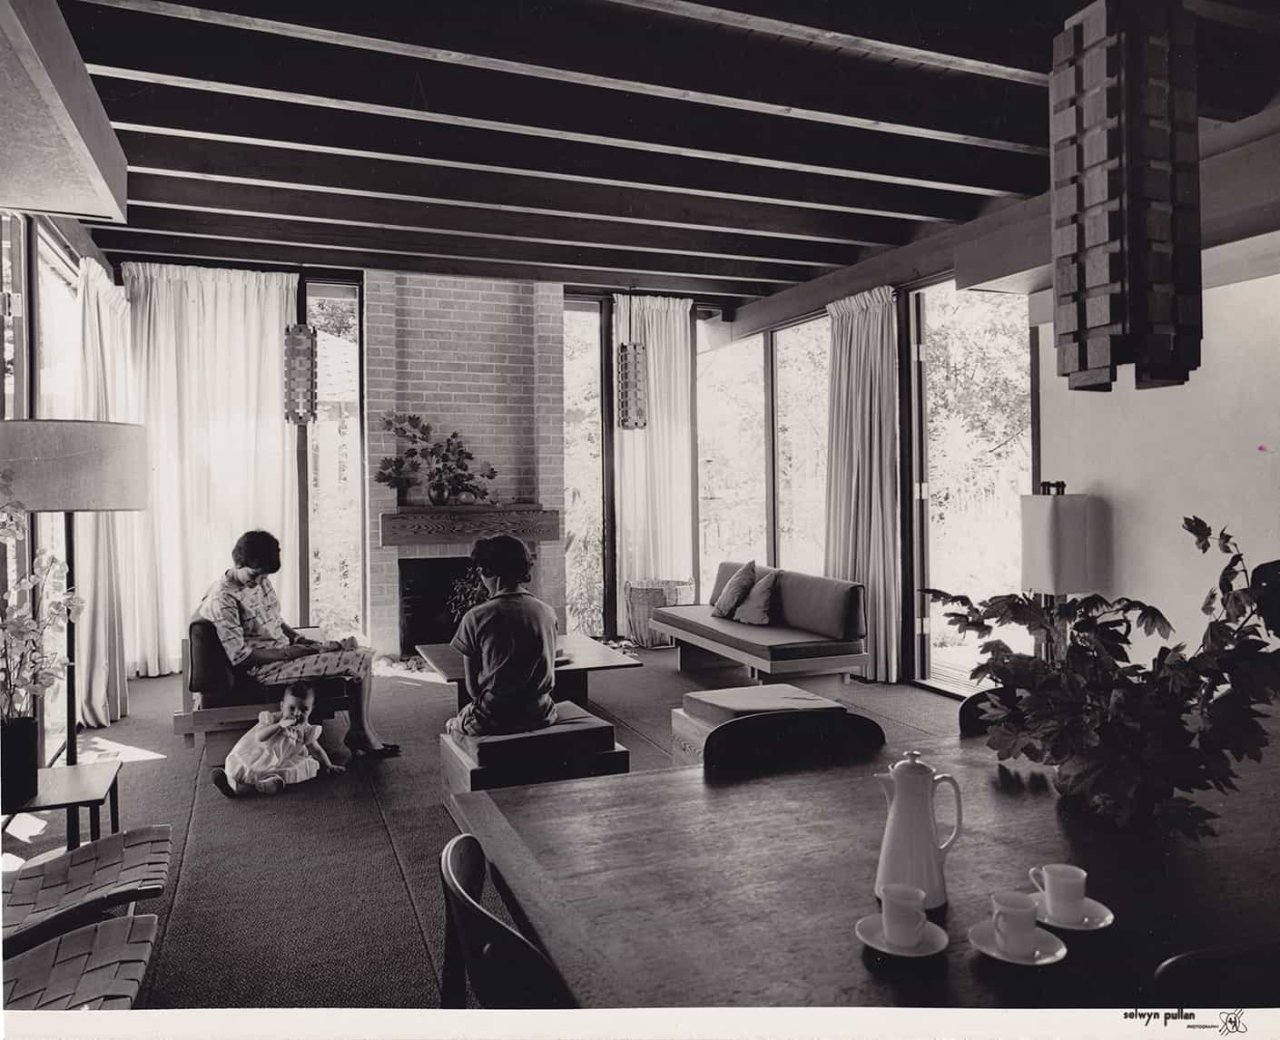 Selwyn Pullan, Dunbar Residence, 1961, (Barry Downs Architect, 1959), Collection of the West Vancouver Art Museum.